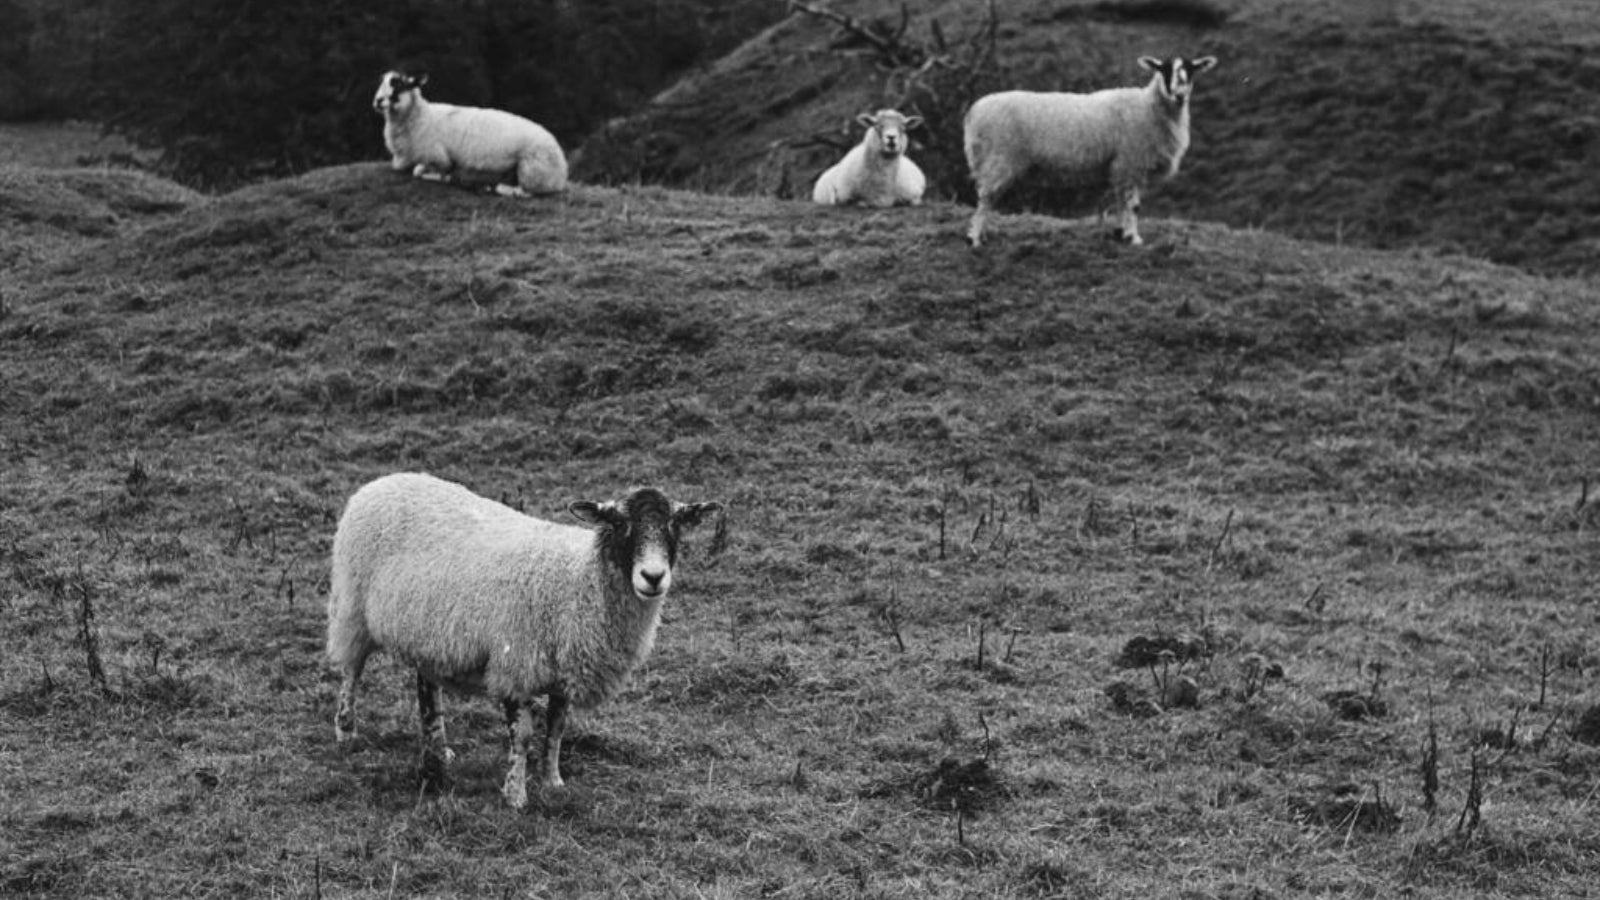 sheep on a hill by hollygoodenough shot on tri-x 35mm film